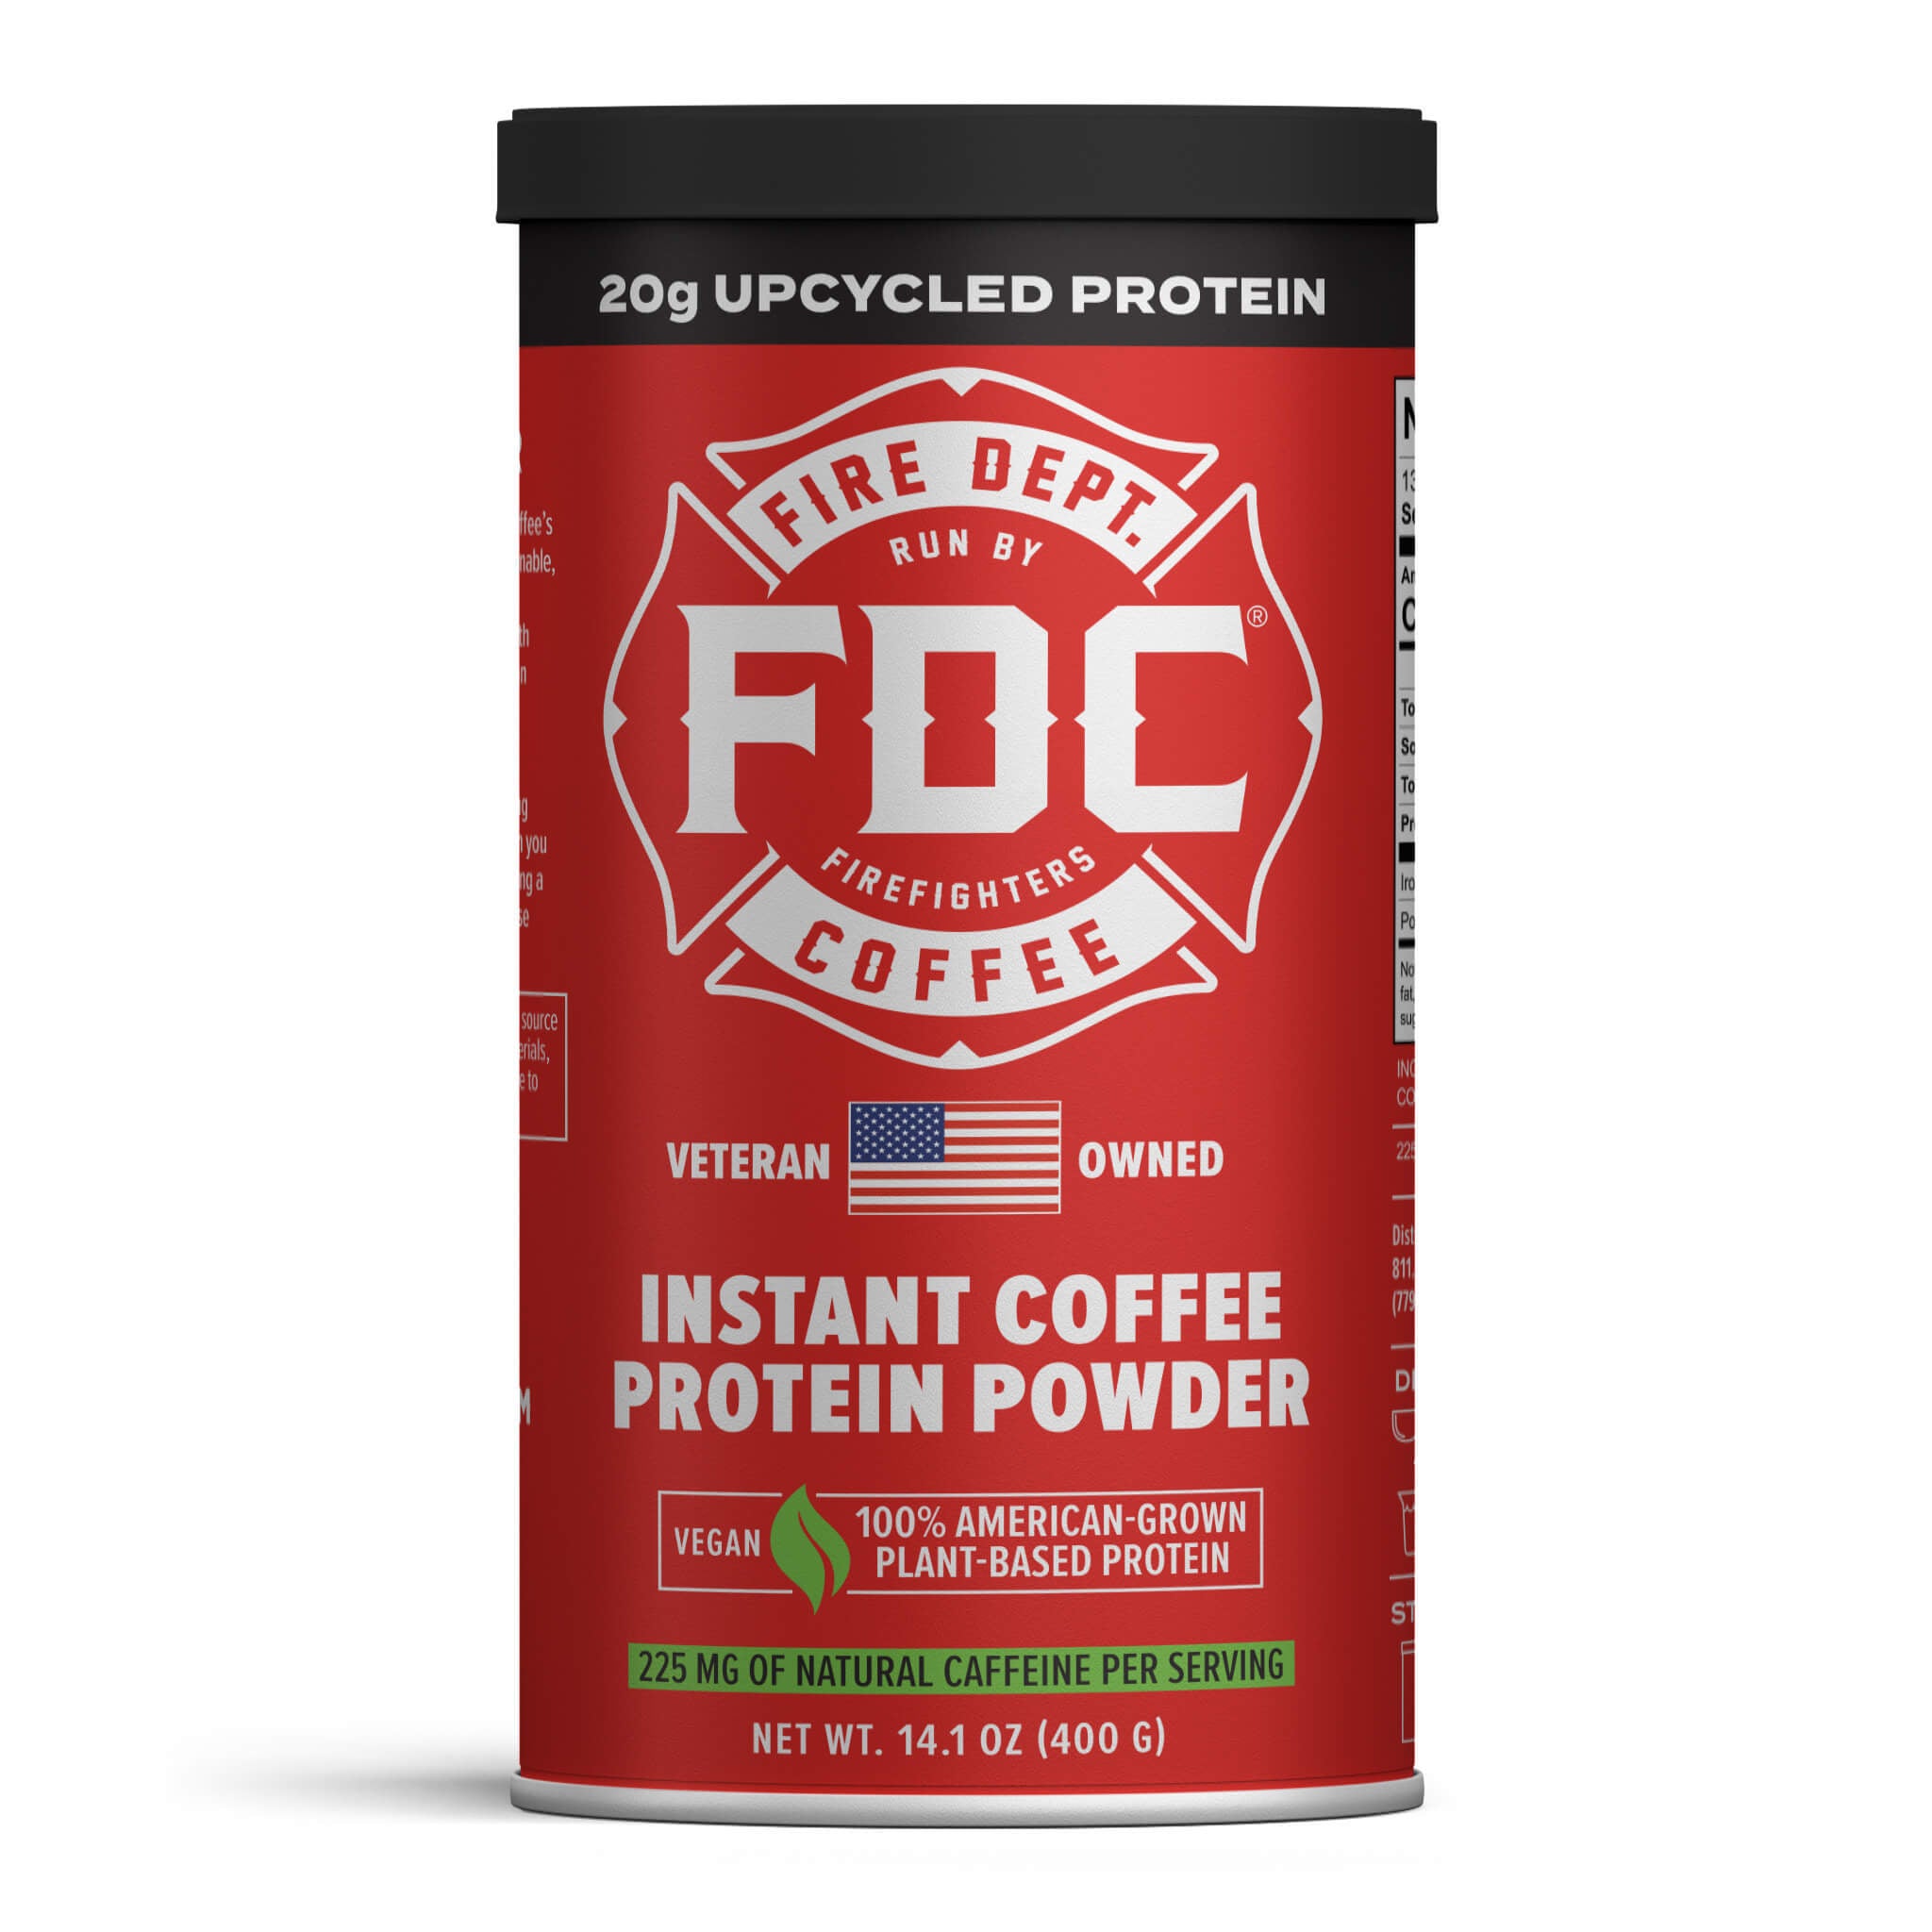 Black protein powder container with red lid Vector Image